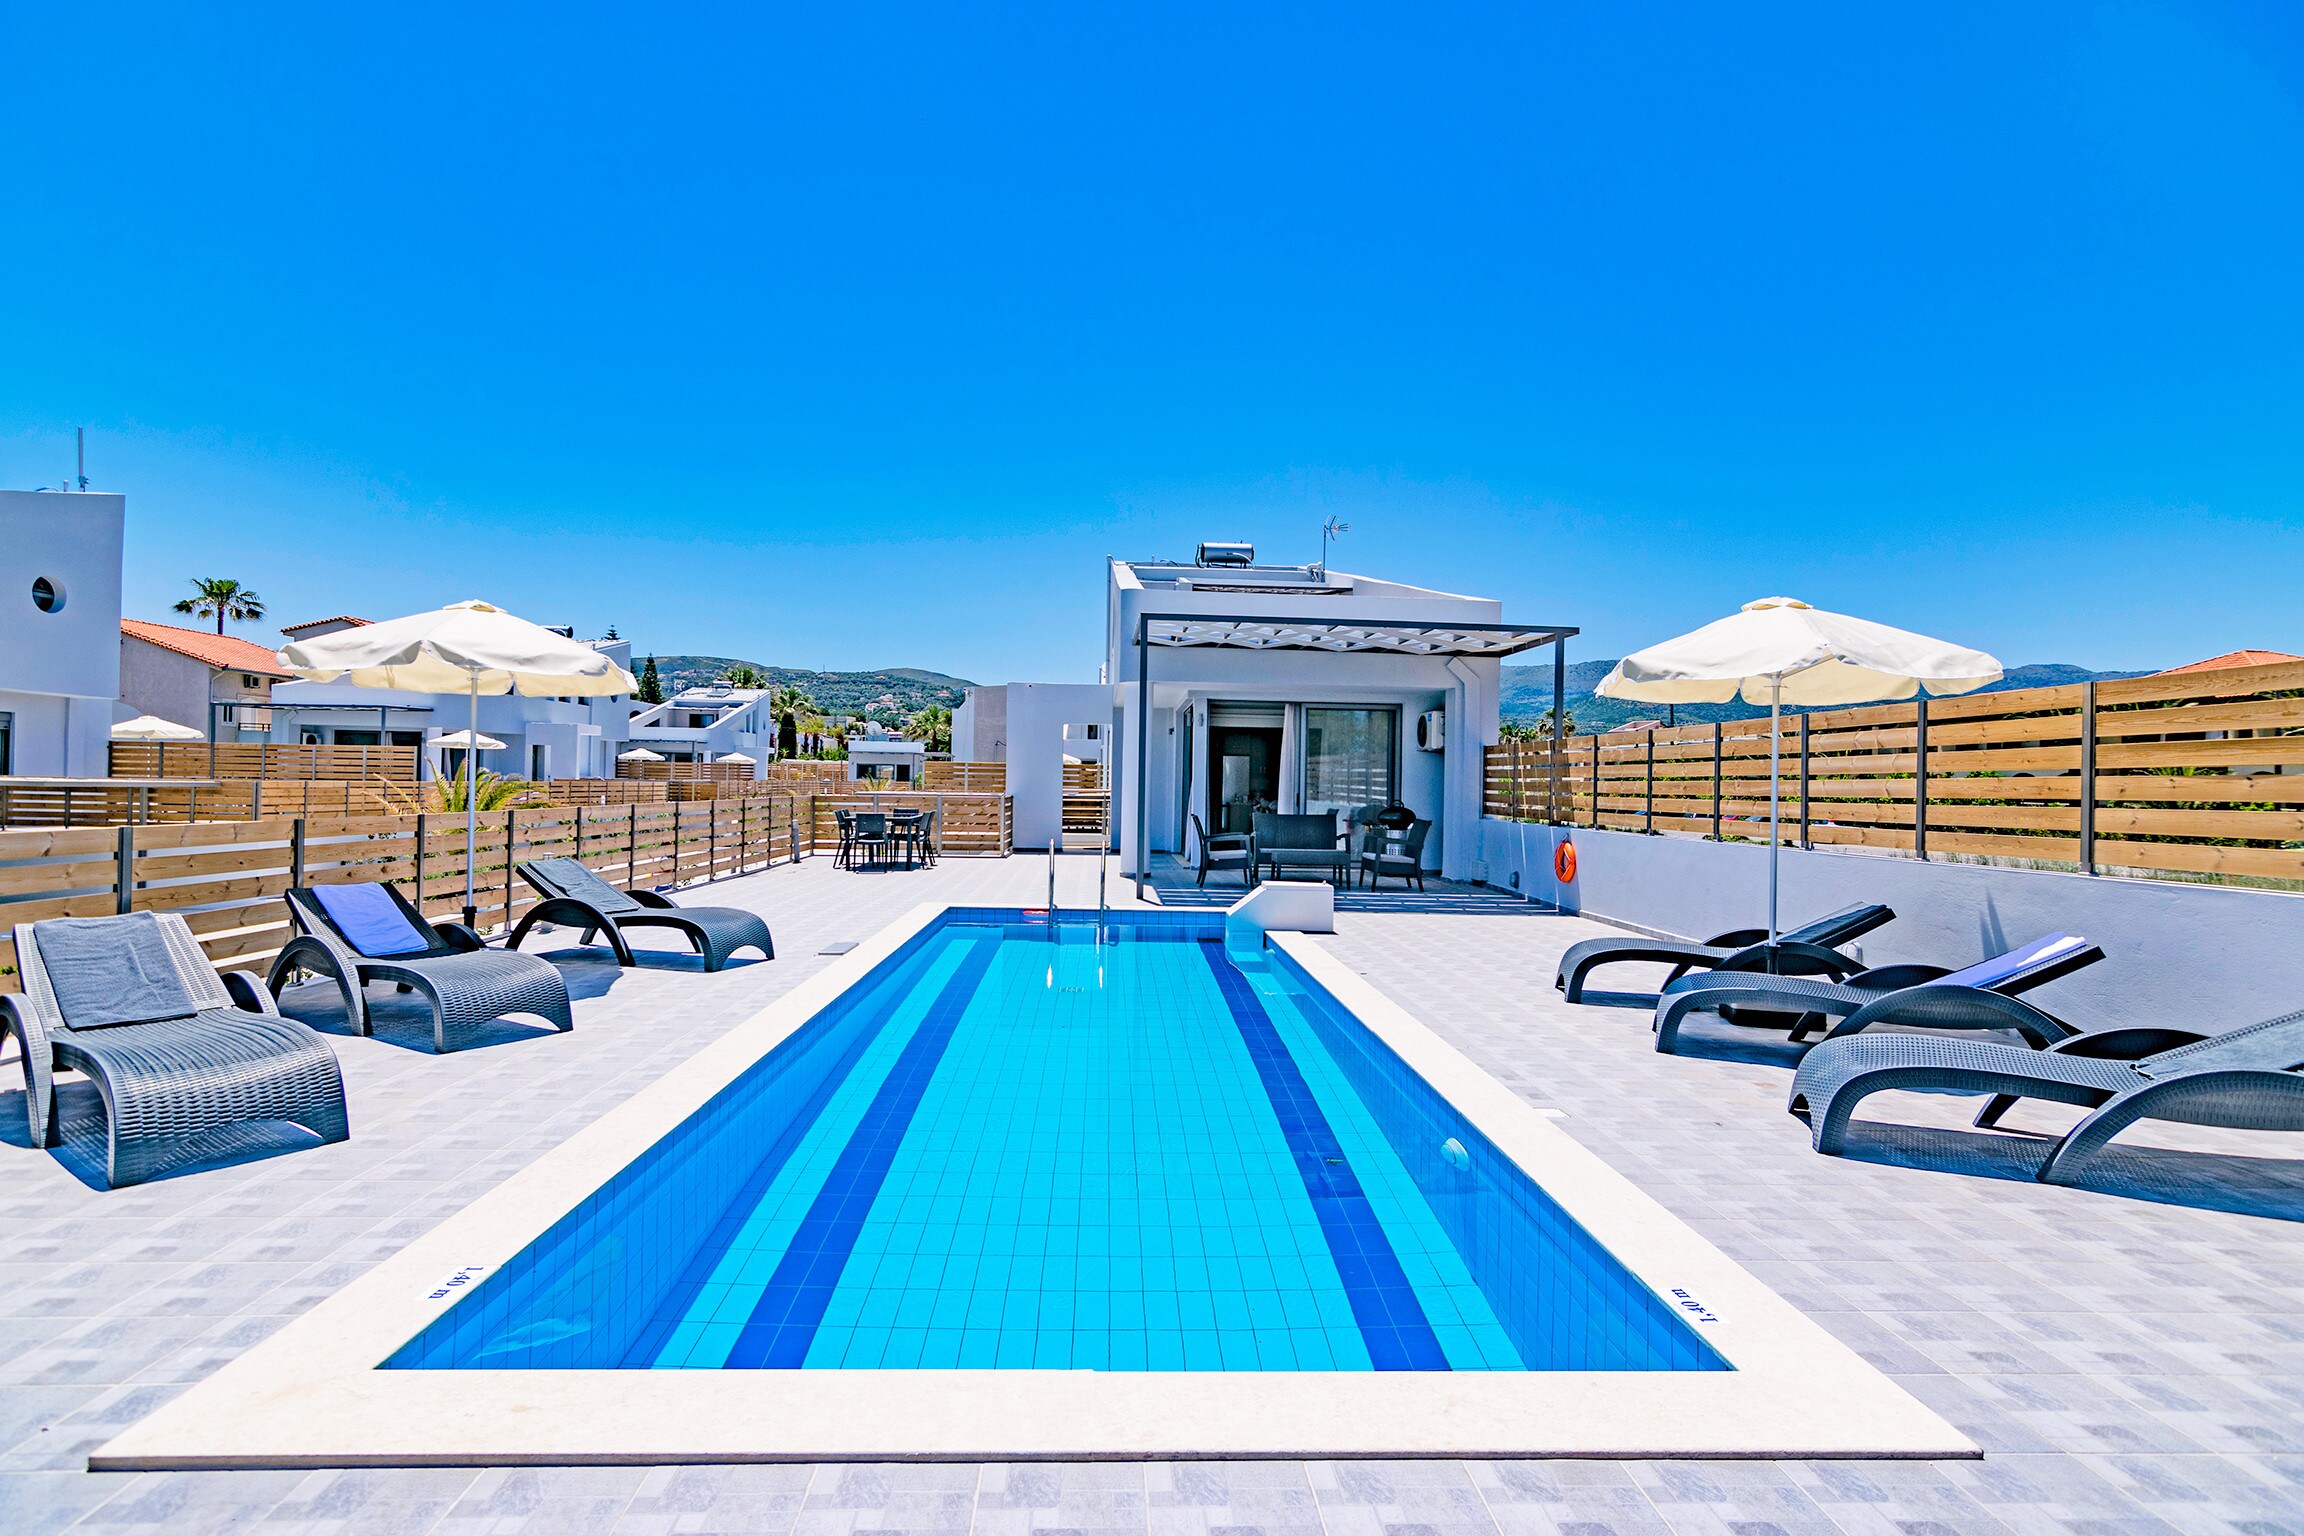 Swimming pool and exterior furniture